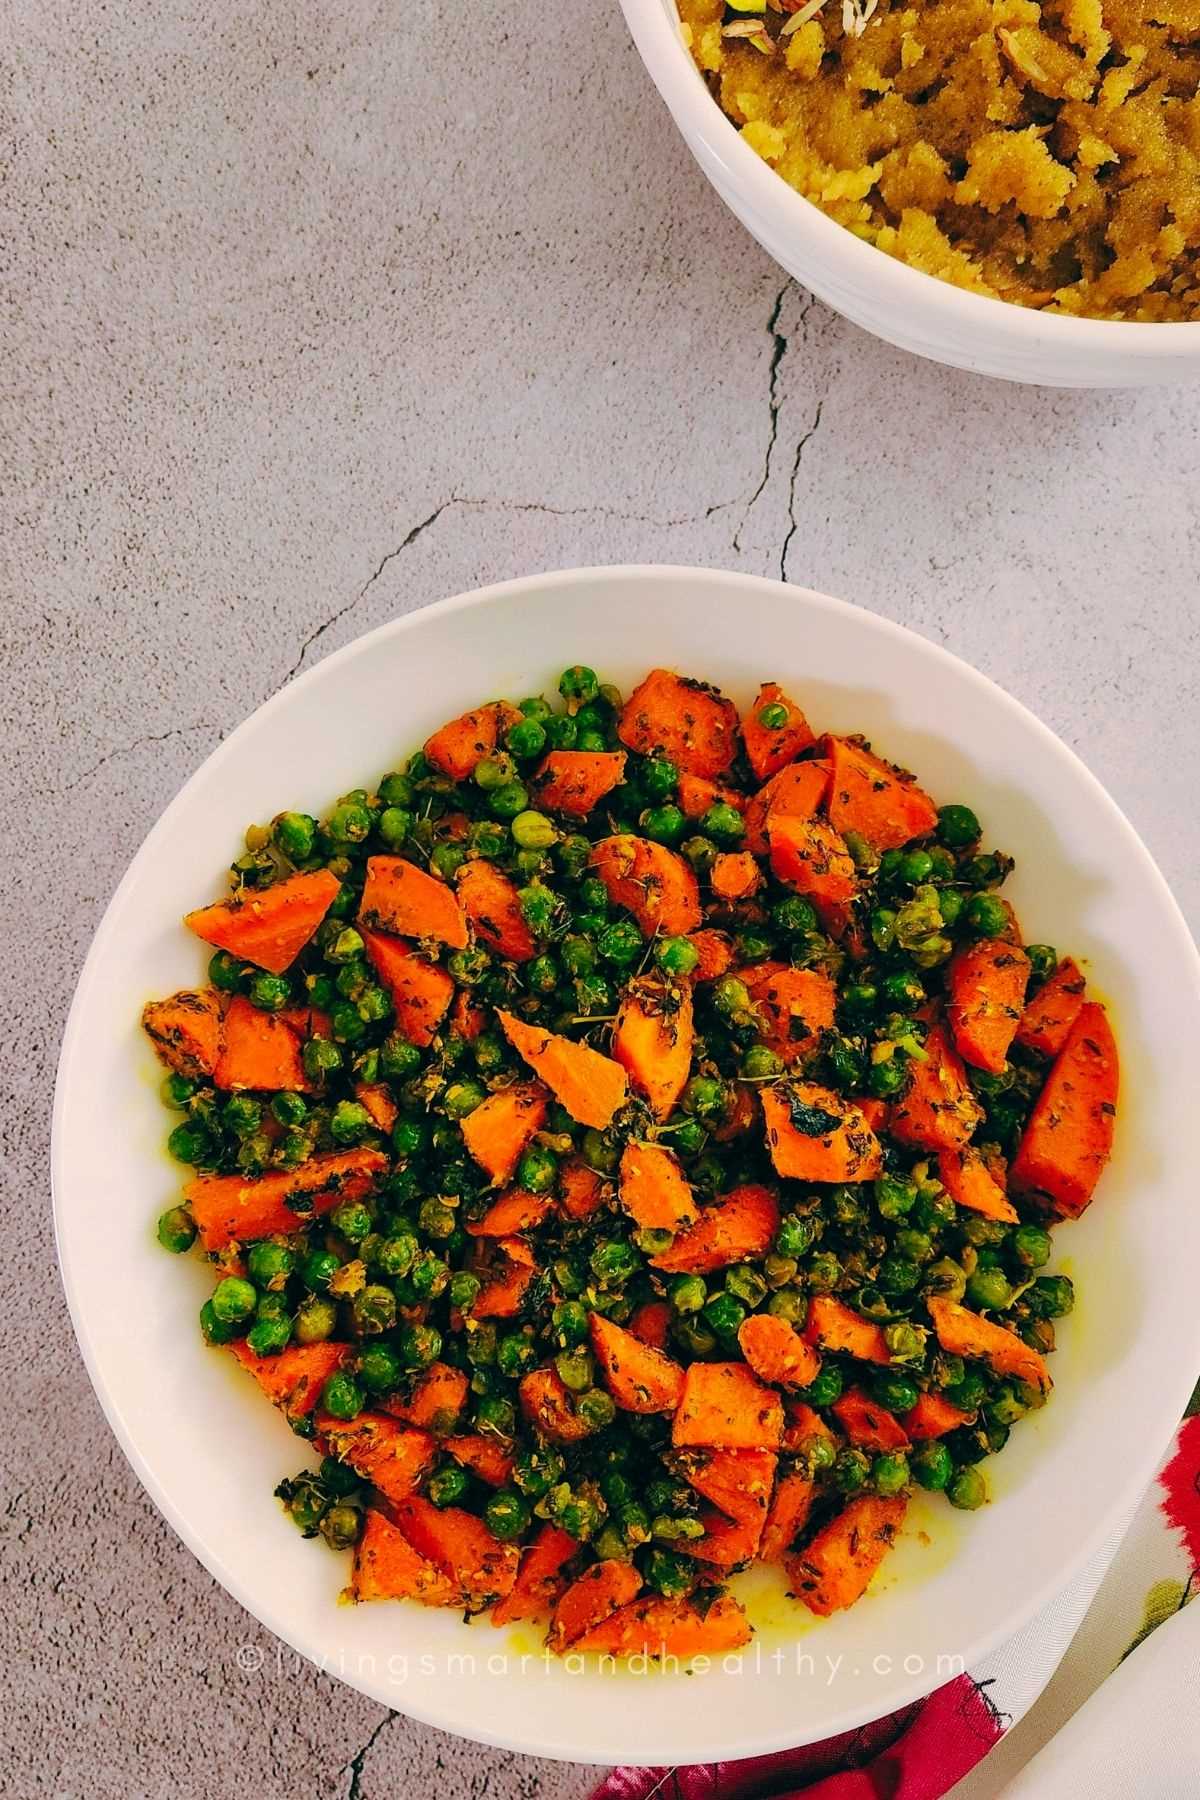 carrot and peas